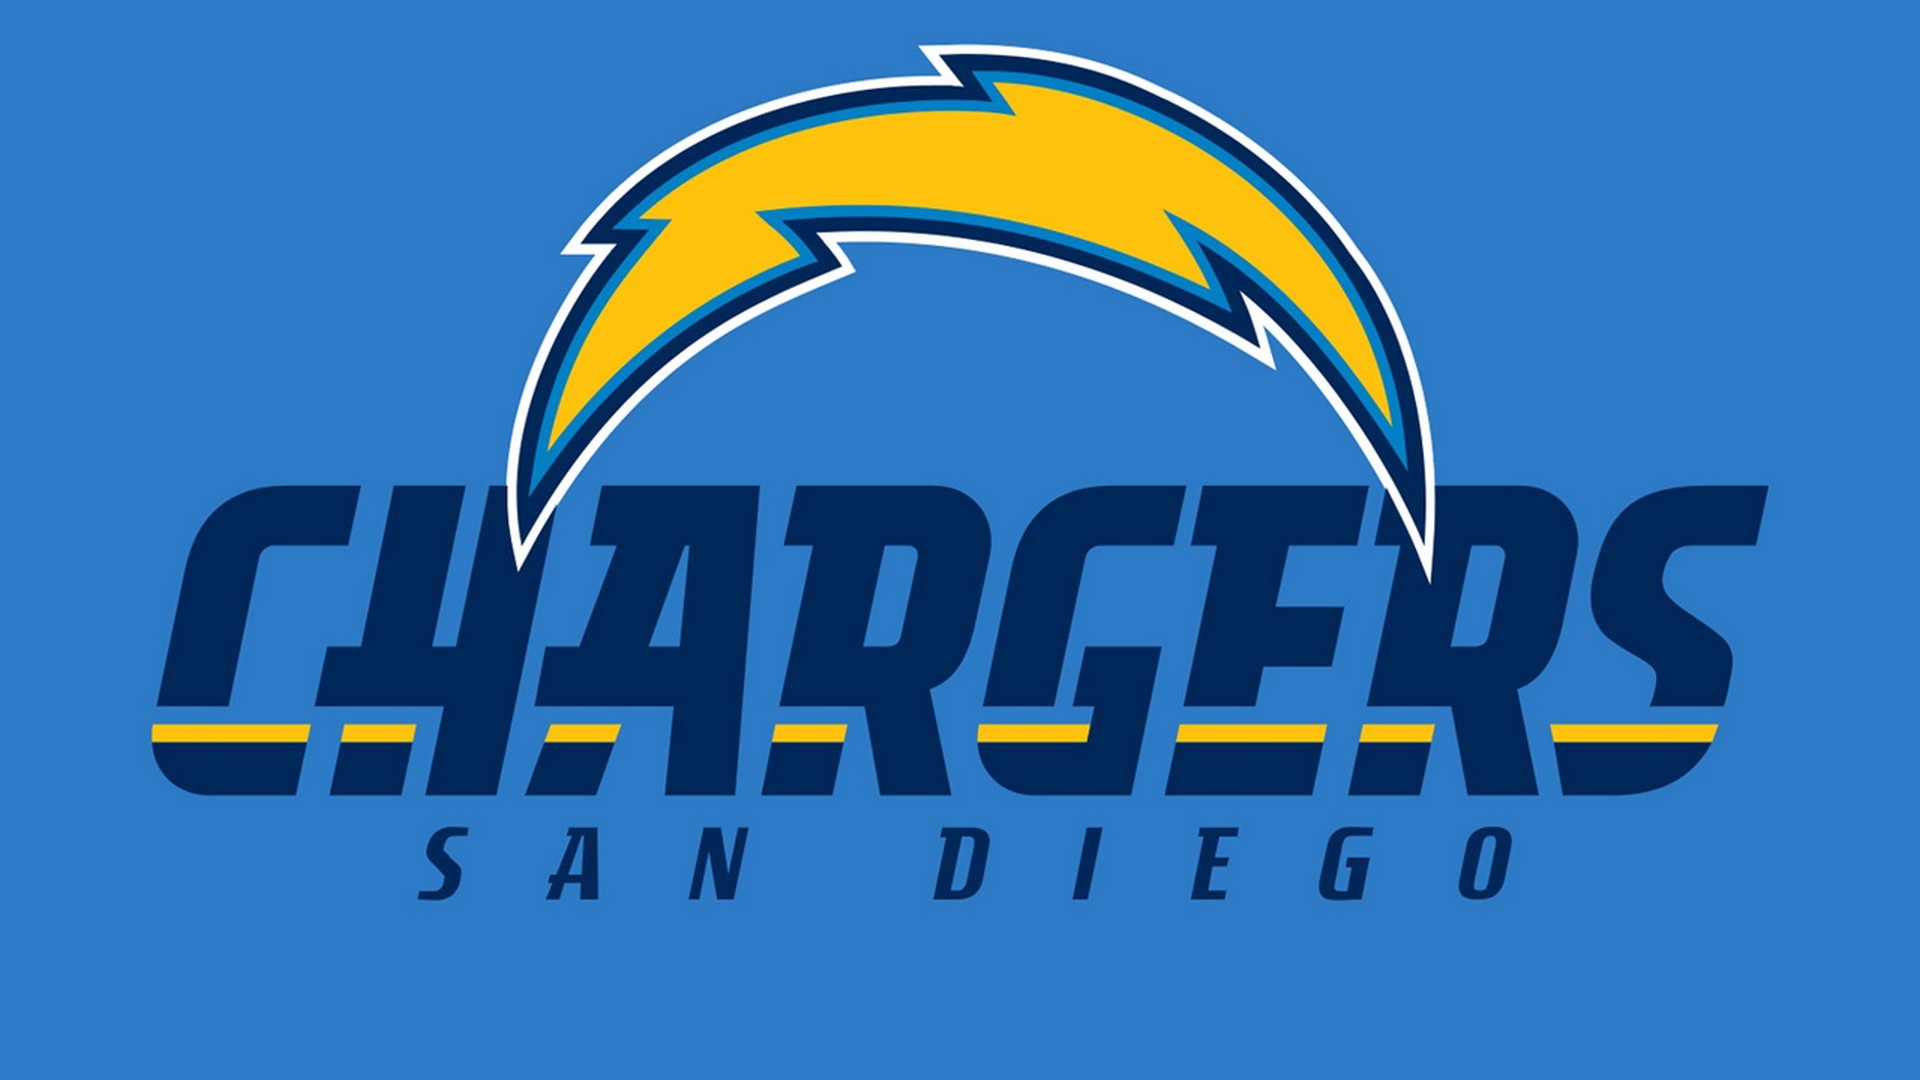 Los Angeles Chargers HD Wallpapers with resolution 1920x1080 pixel. You can make this wallpaper for your Mac or Windows Desktop Background, iPhone, Android or Tablet and another Smartphone device